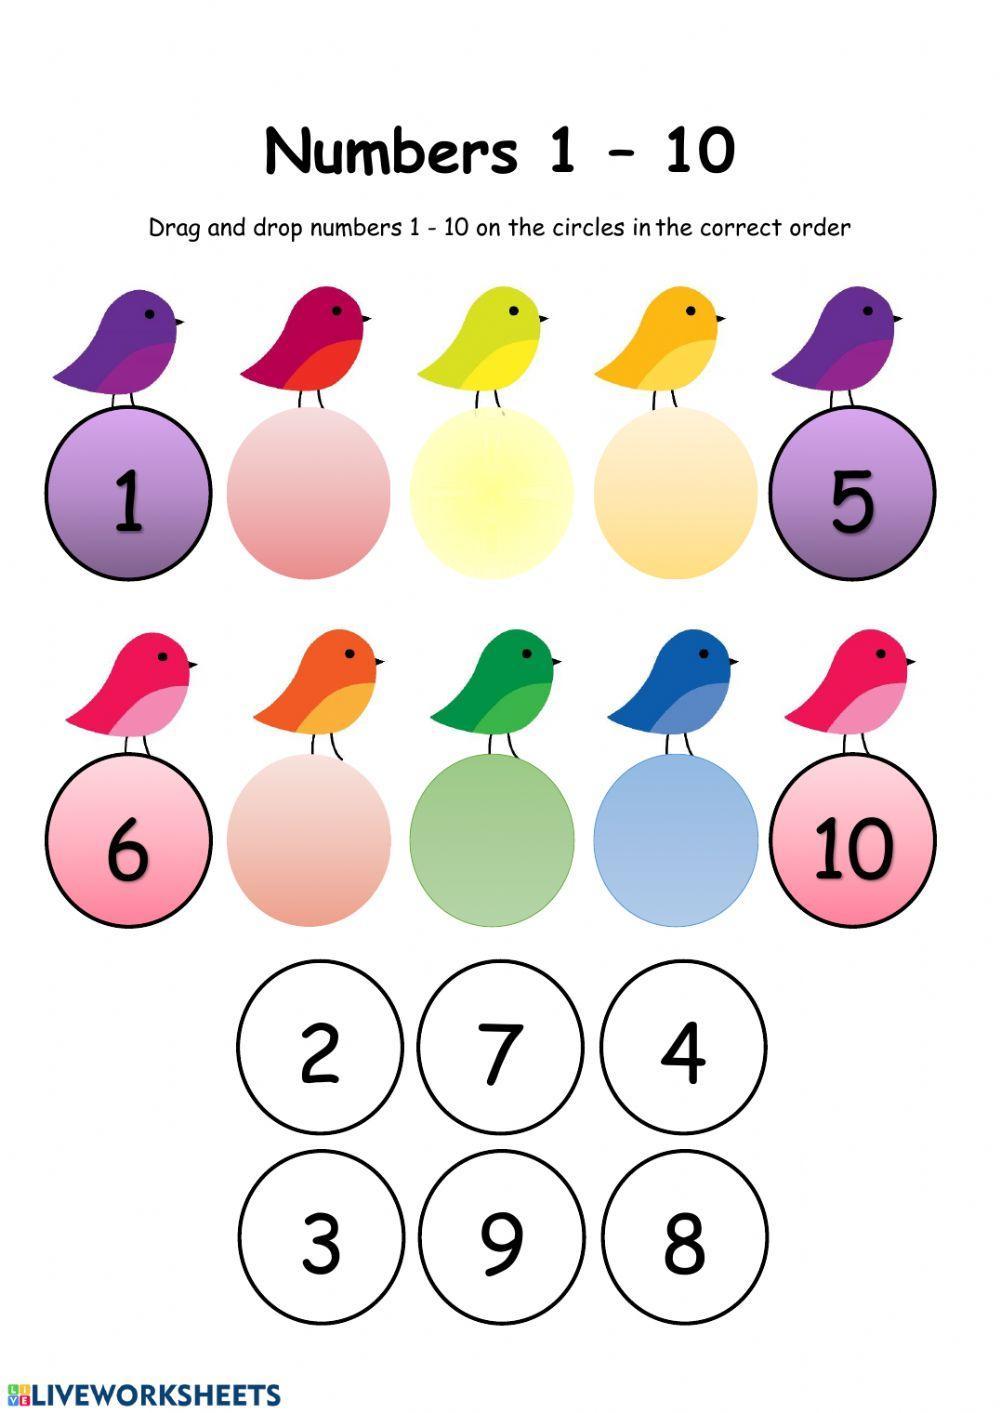 Arranging numbers 1-10